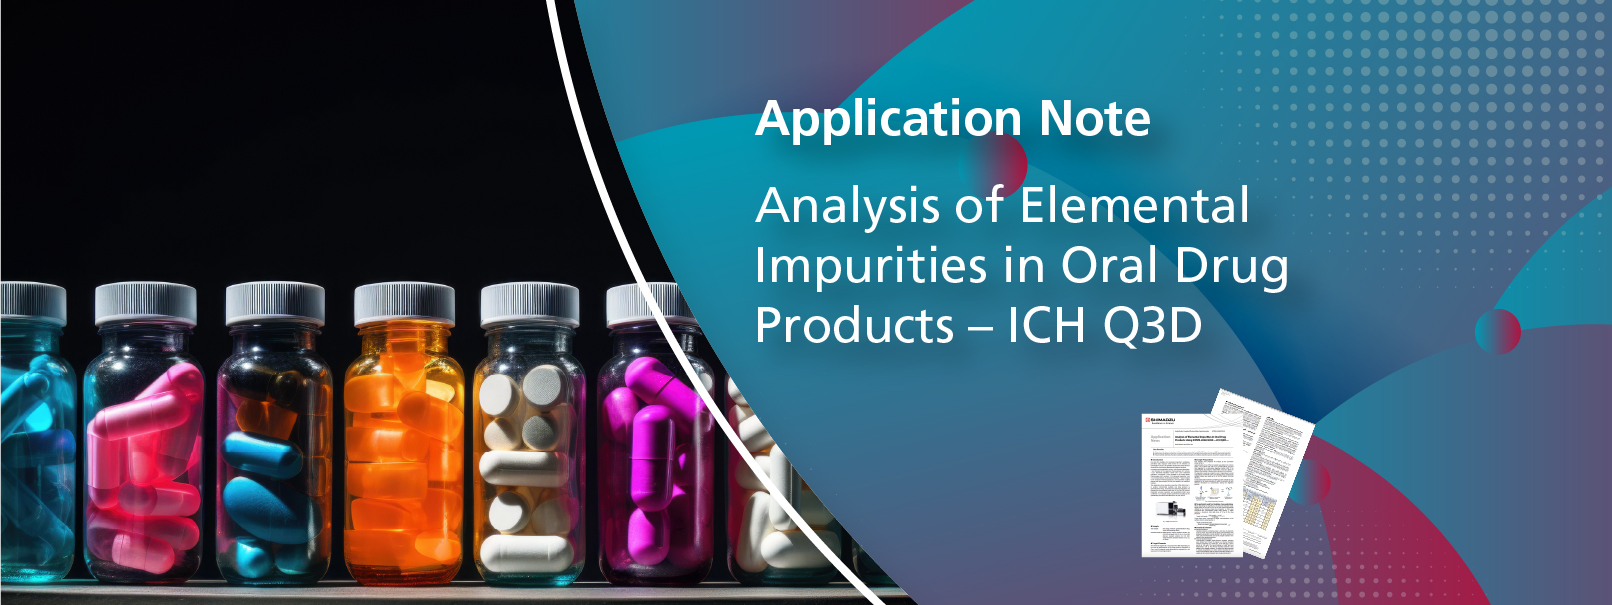 Analysis of Elemental Impurities in Oral Drug Products - ICH Q3D